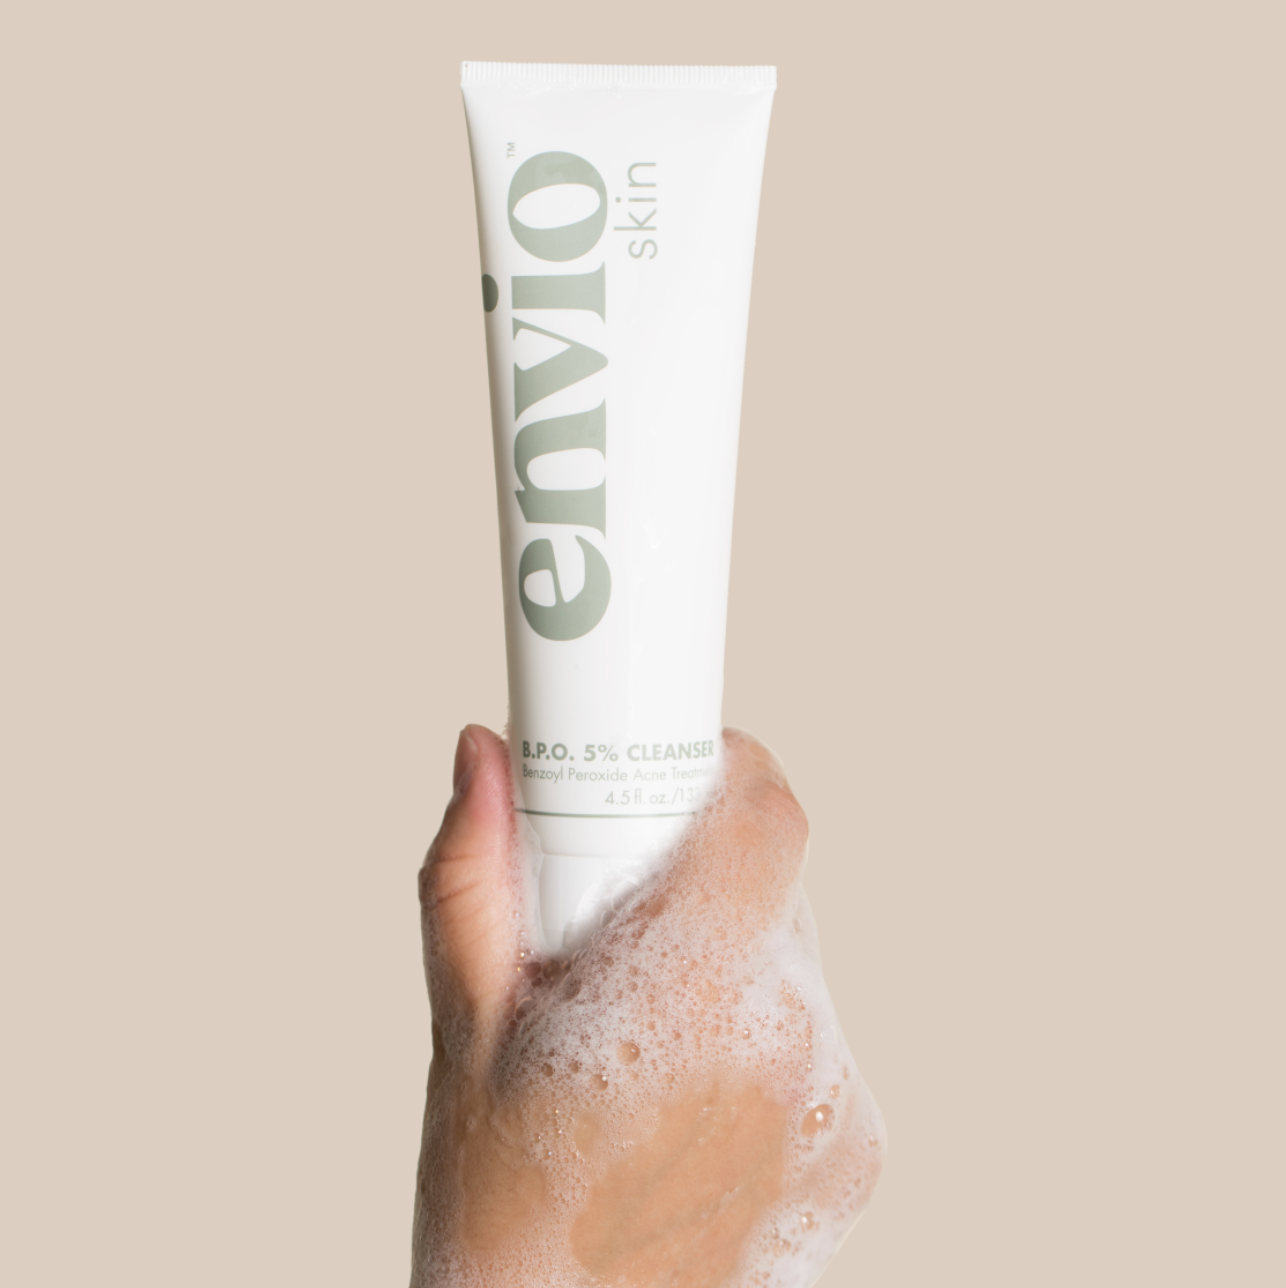 Envio Acne Cleanser Product Being Held Up By A Hand Covered In Soap Suds over a light brown background 